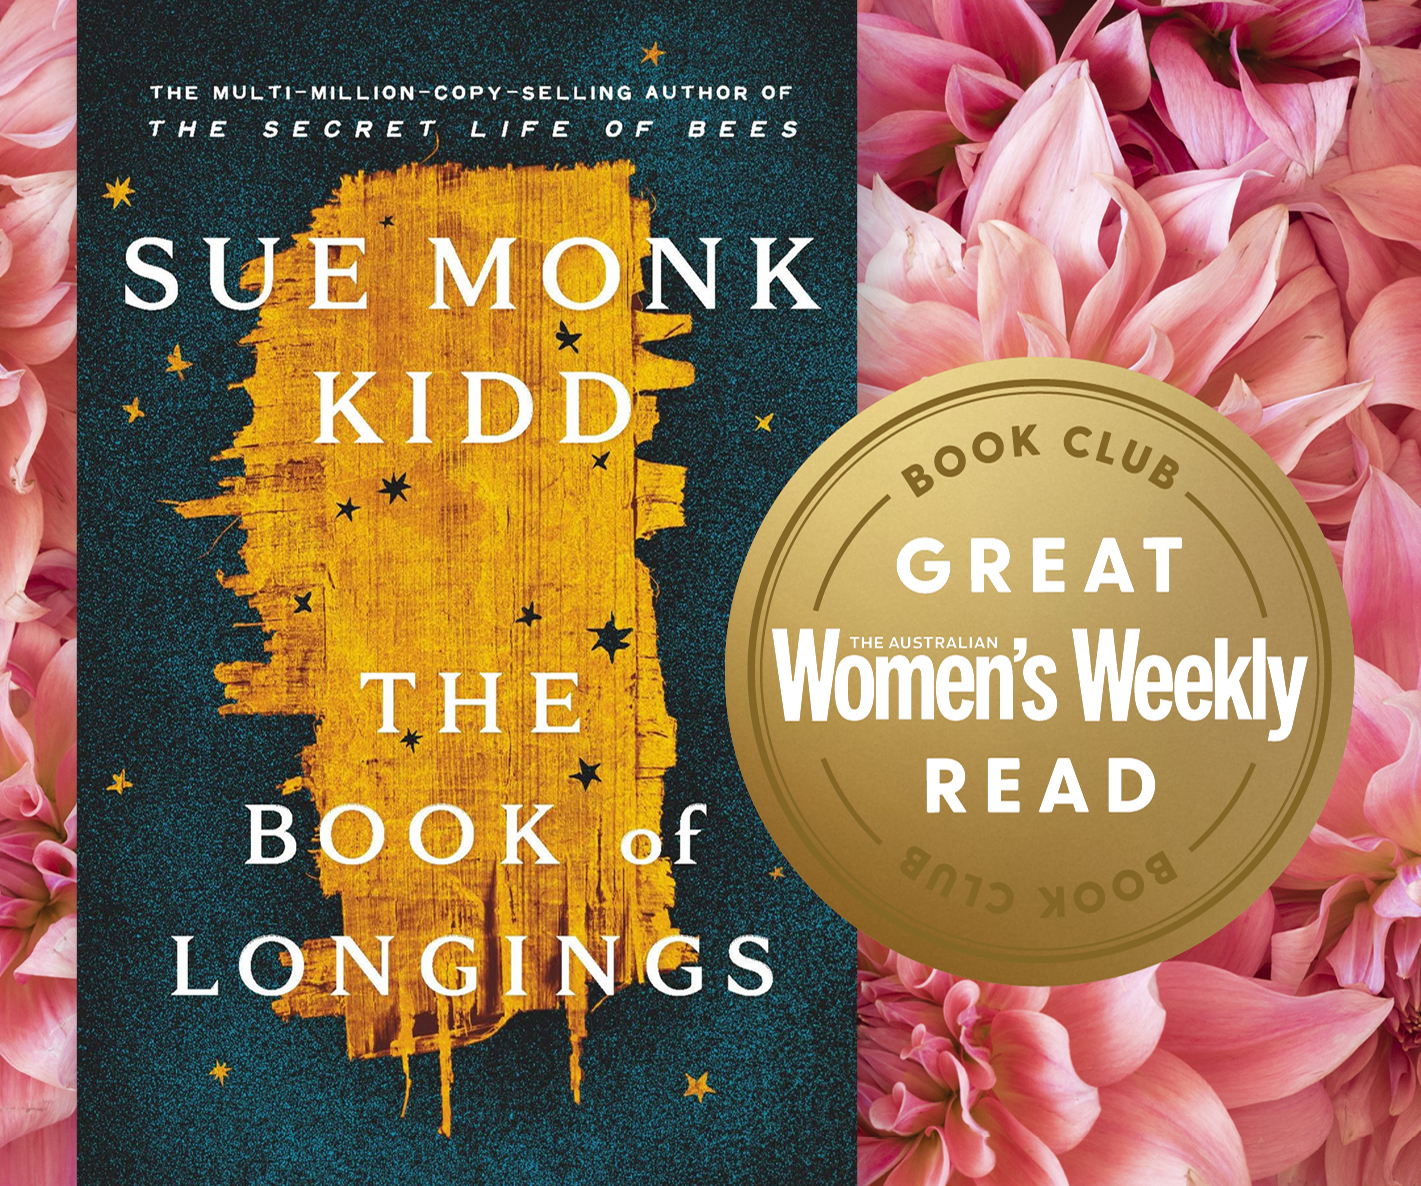 The Australian Women’s Weekly’s Book Club picks for May 2020